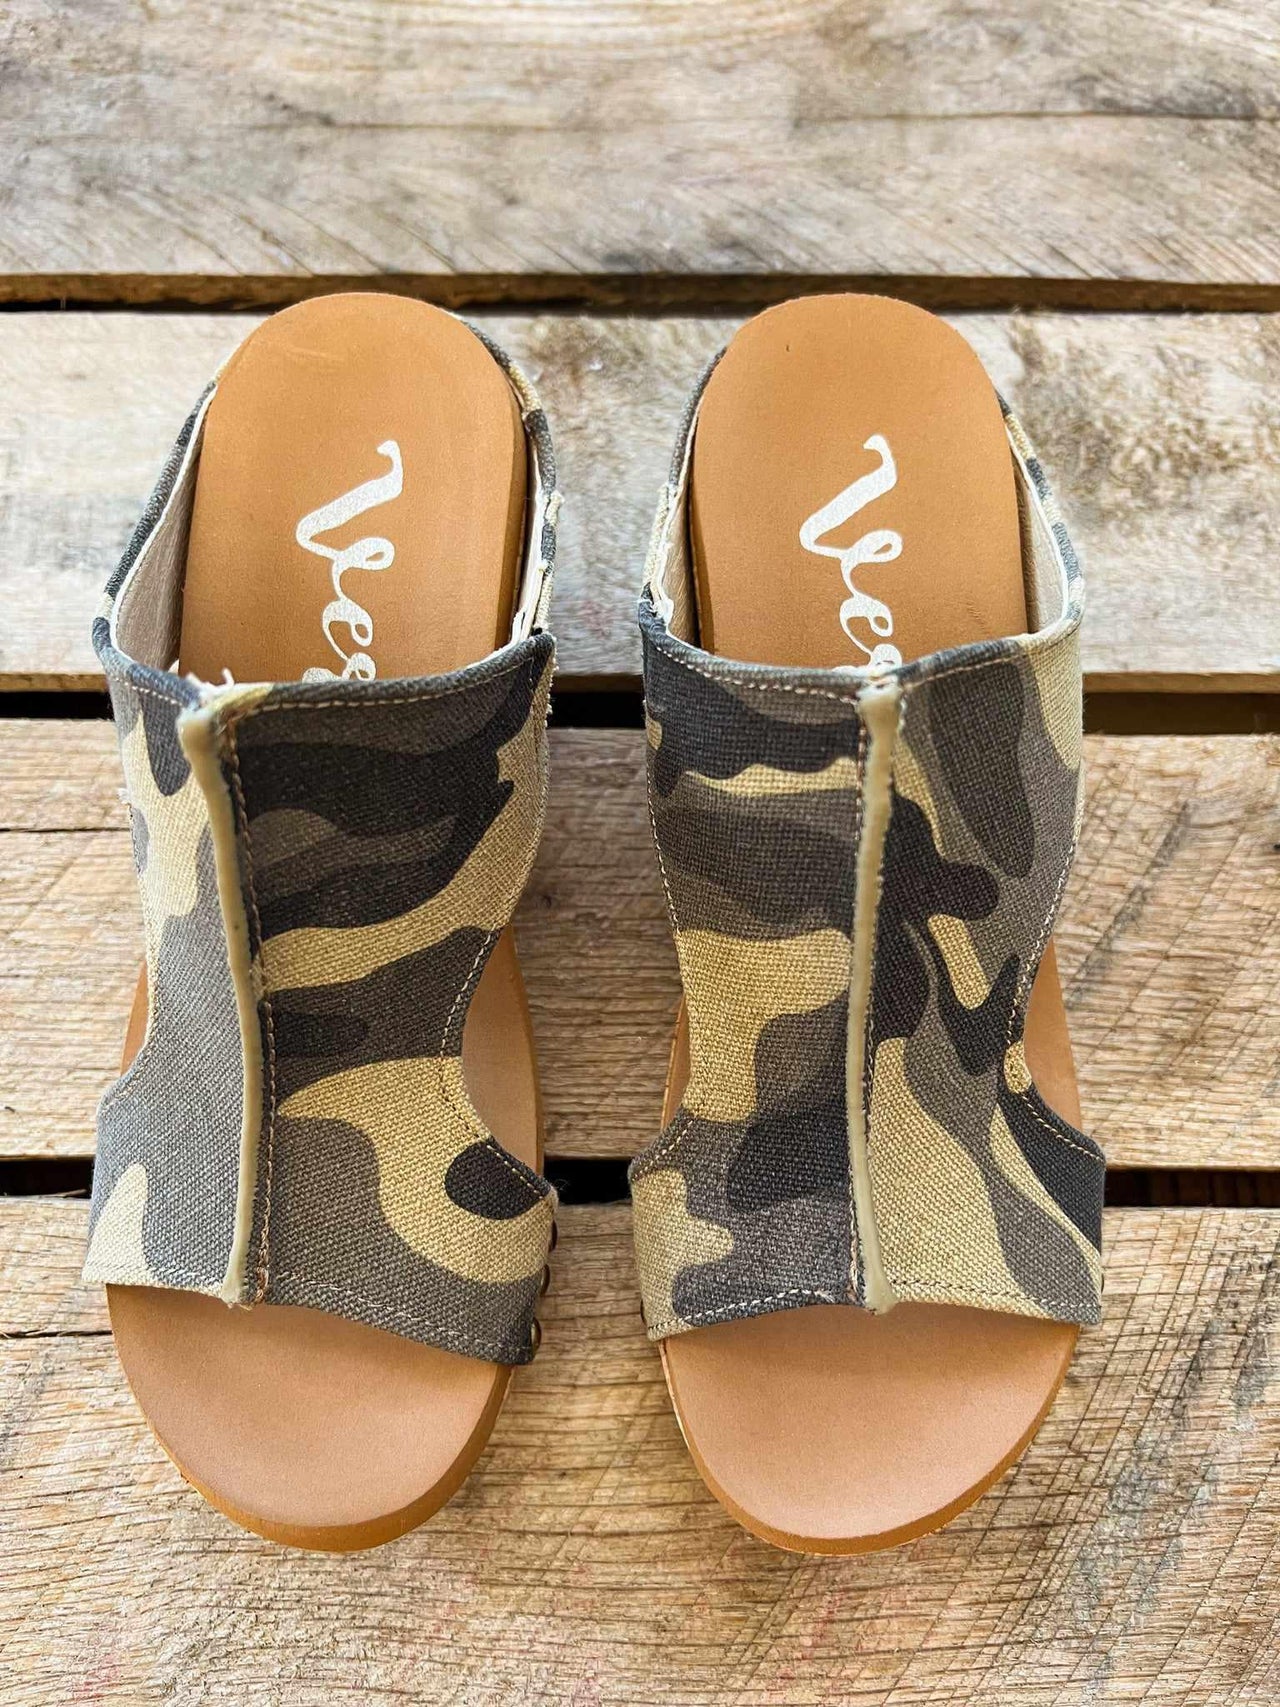 Walkin' Tall In These Camo Wedges